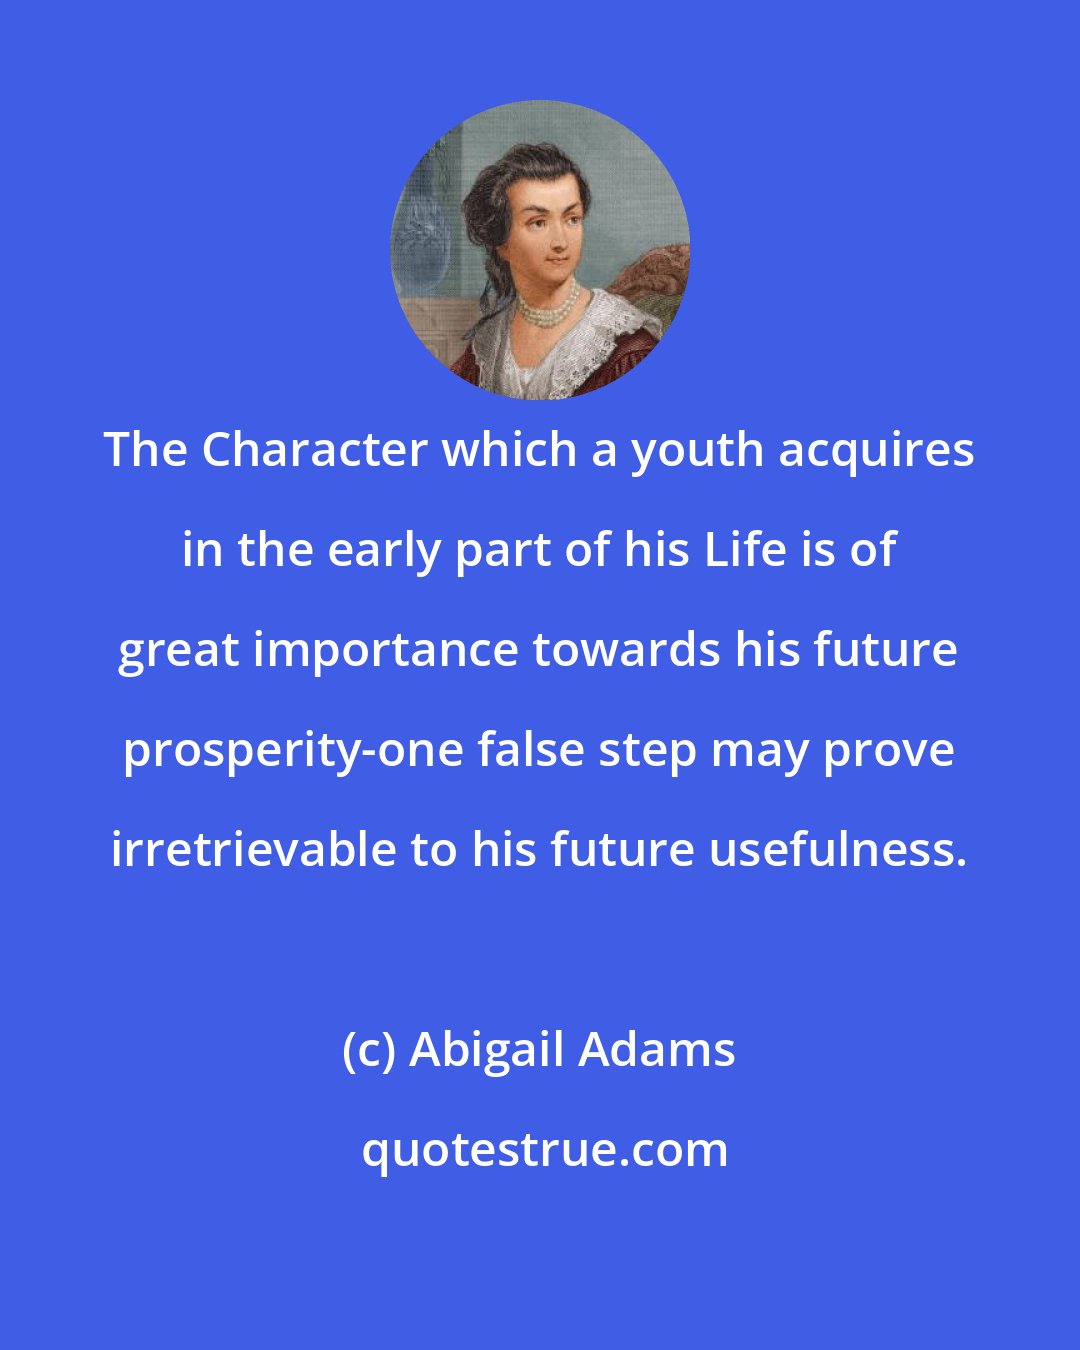 Abigail Adams: The Character which a youth acquires in the early part of his Life is of great importance towards his future prosperity-one false step may prove irretrievable to his future usefulness.